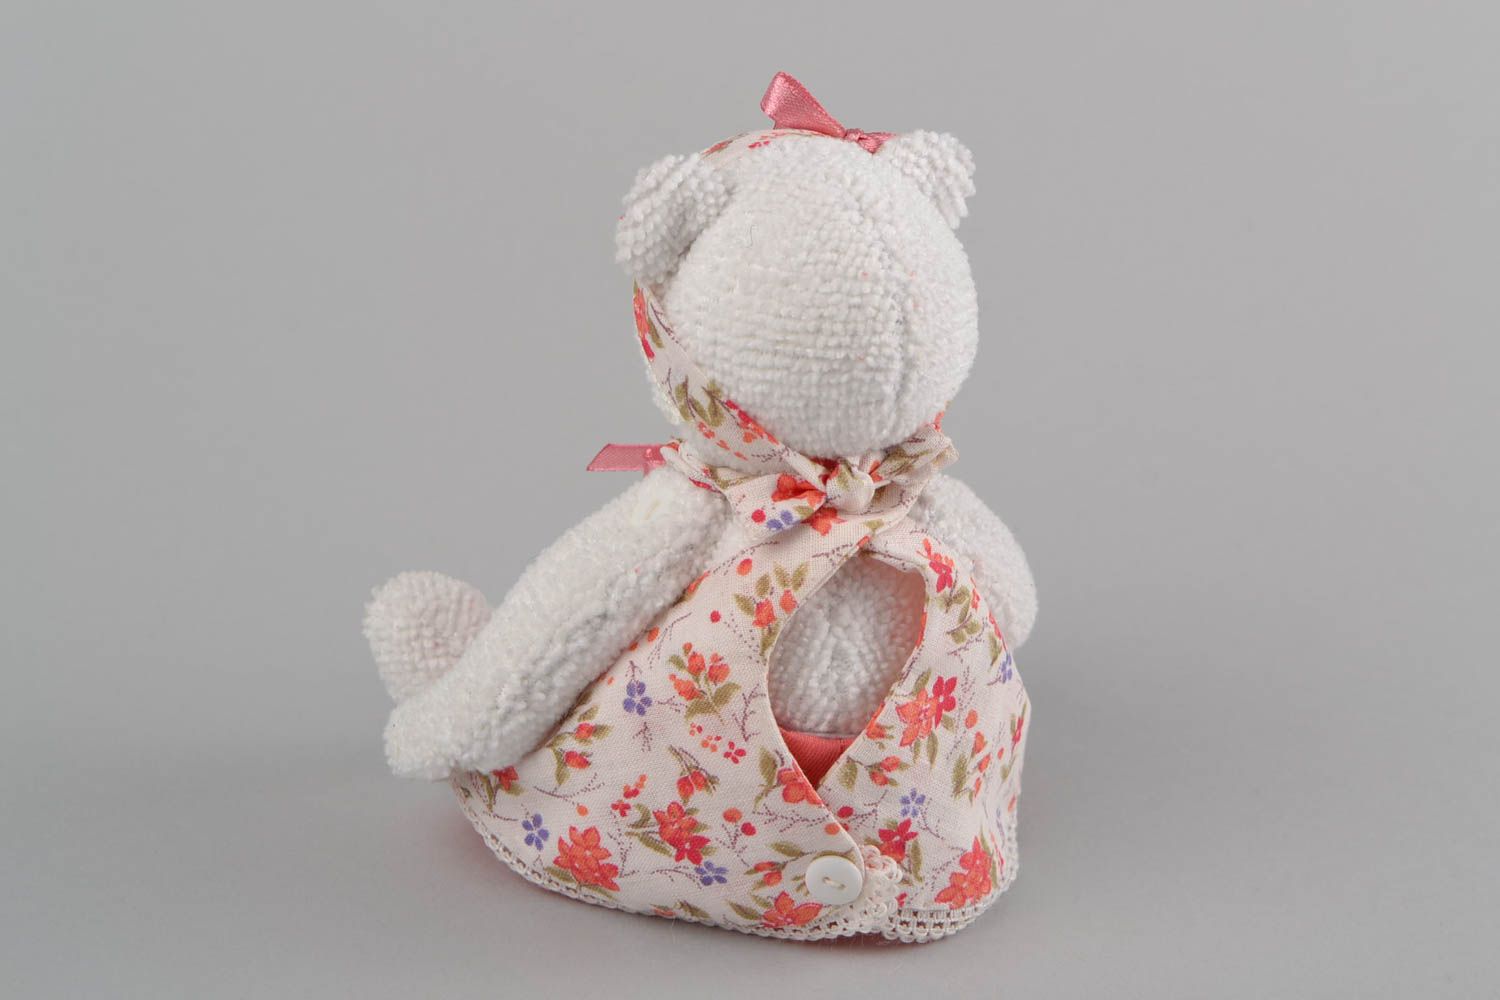 Handmade designer small fabric soft toy white bear in floral dress with headband photo 5